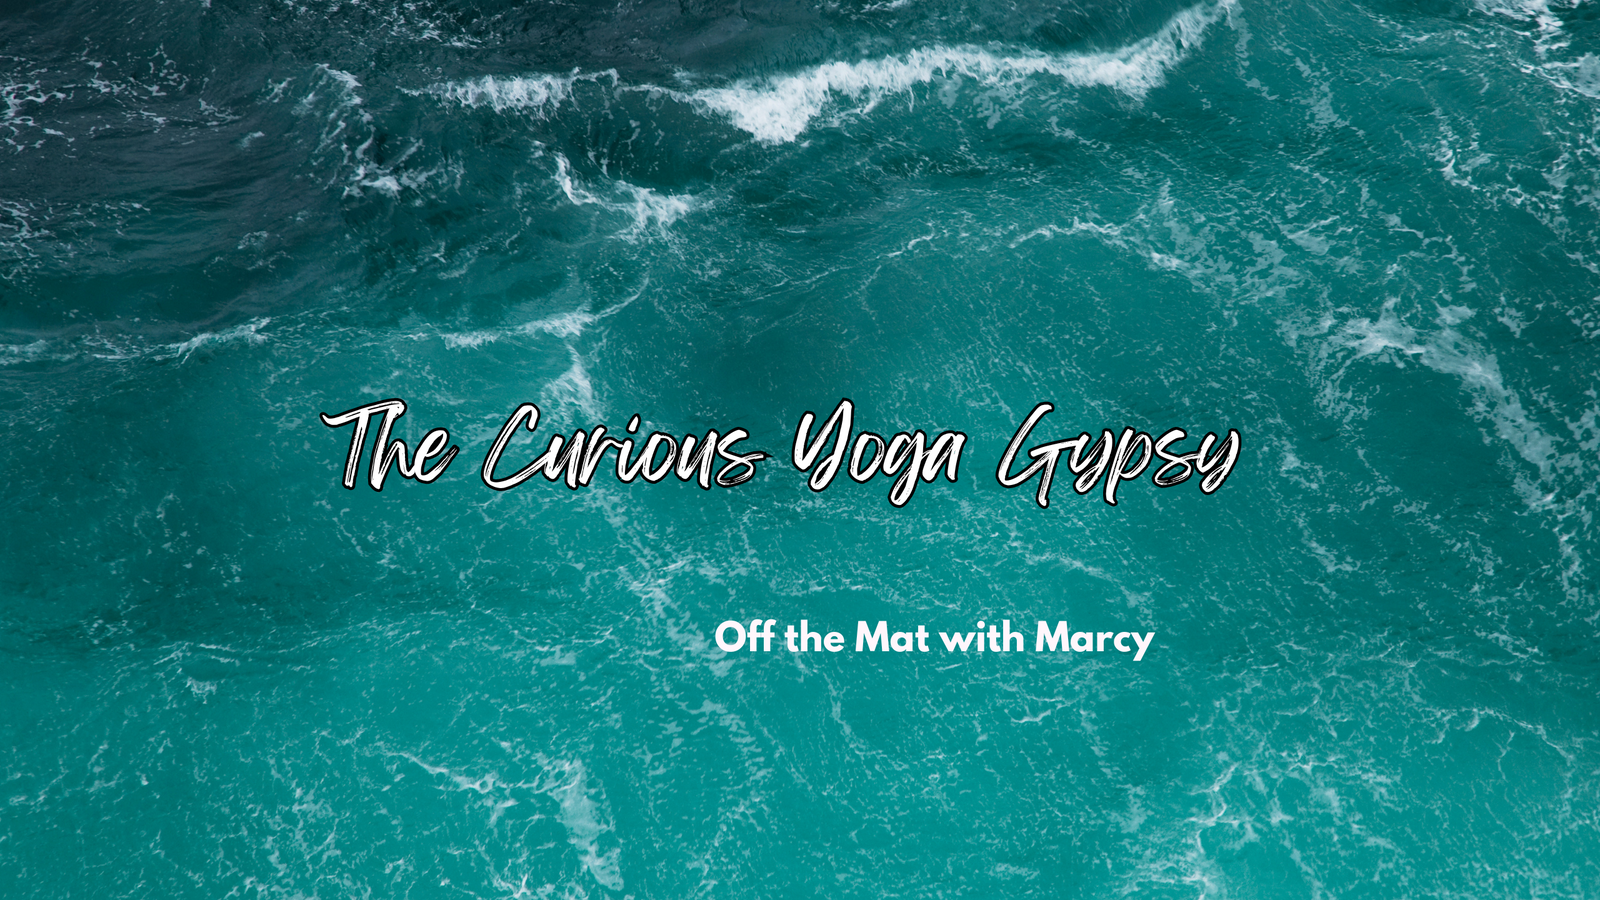 Off the Mat with Marcy: The Curious Yoga Gypsy by Marcy Kelly